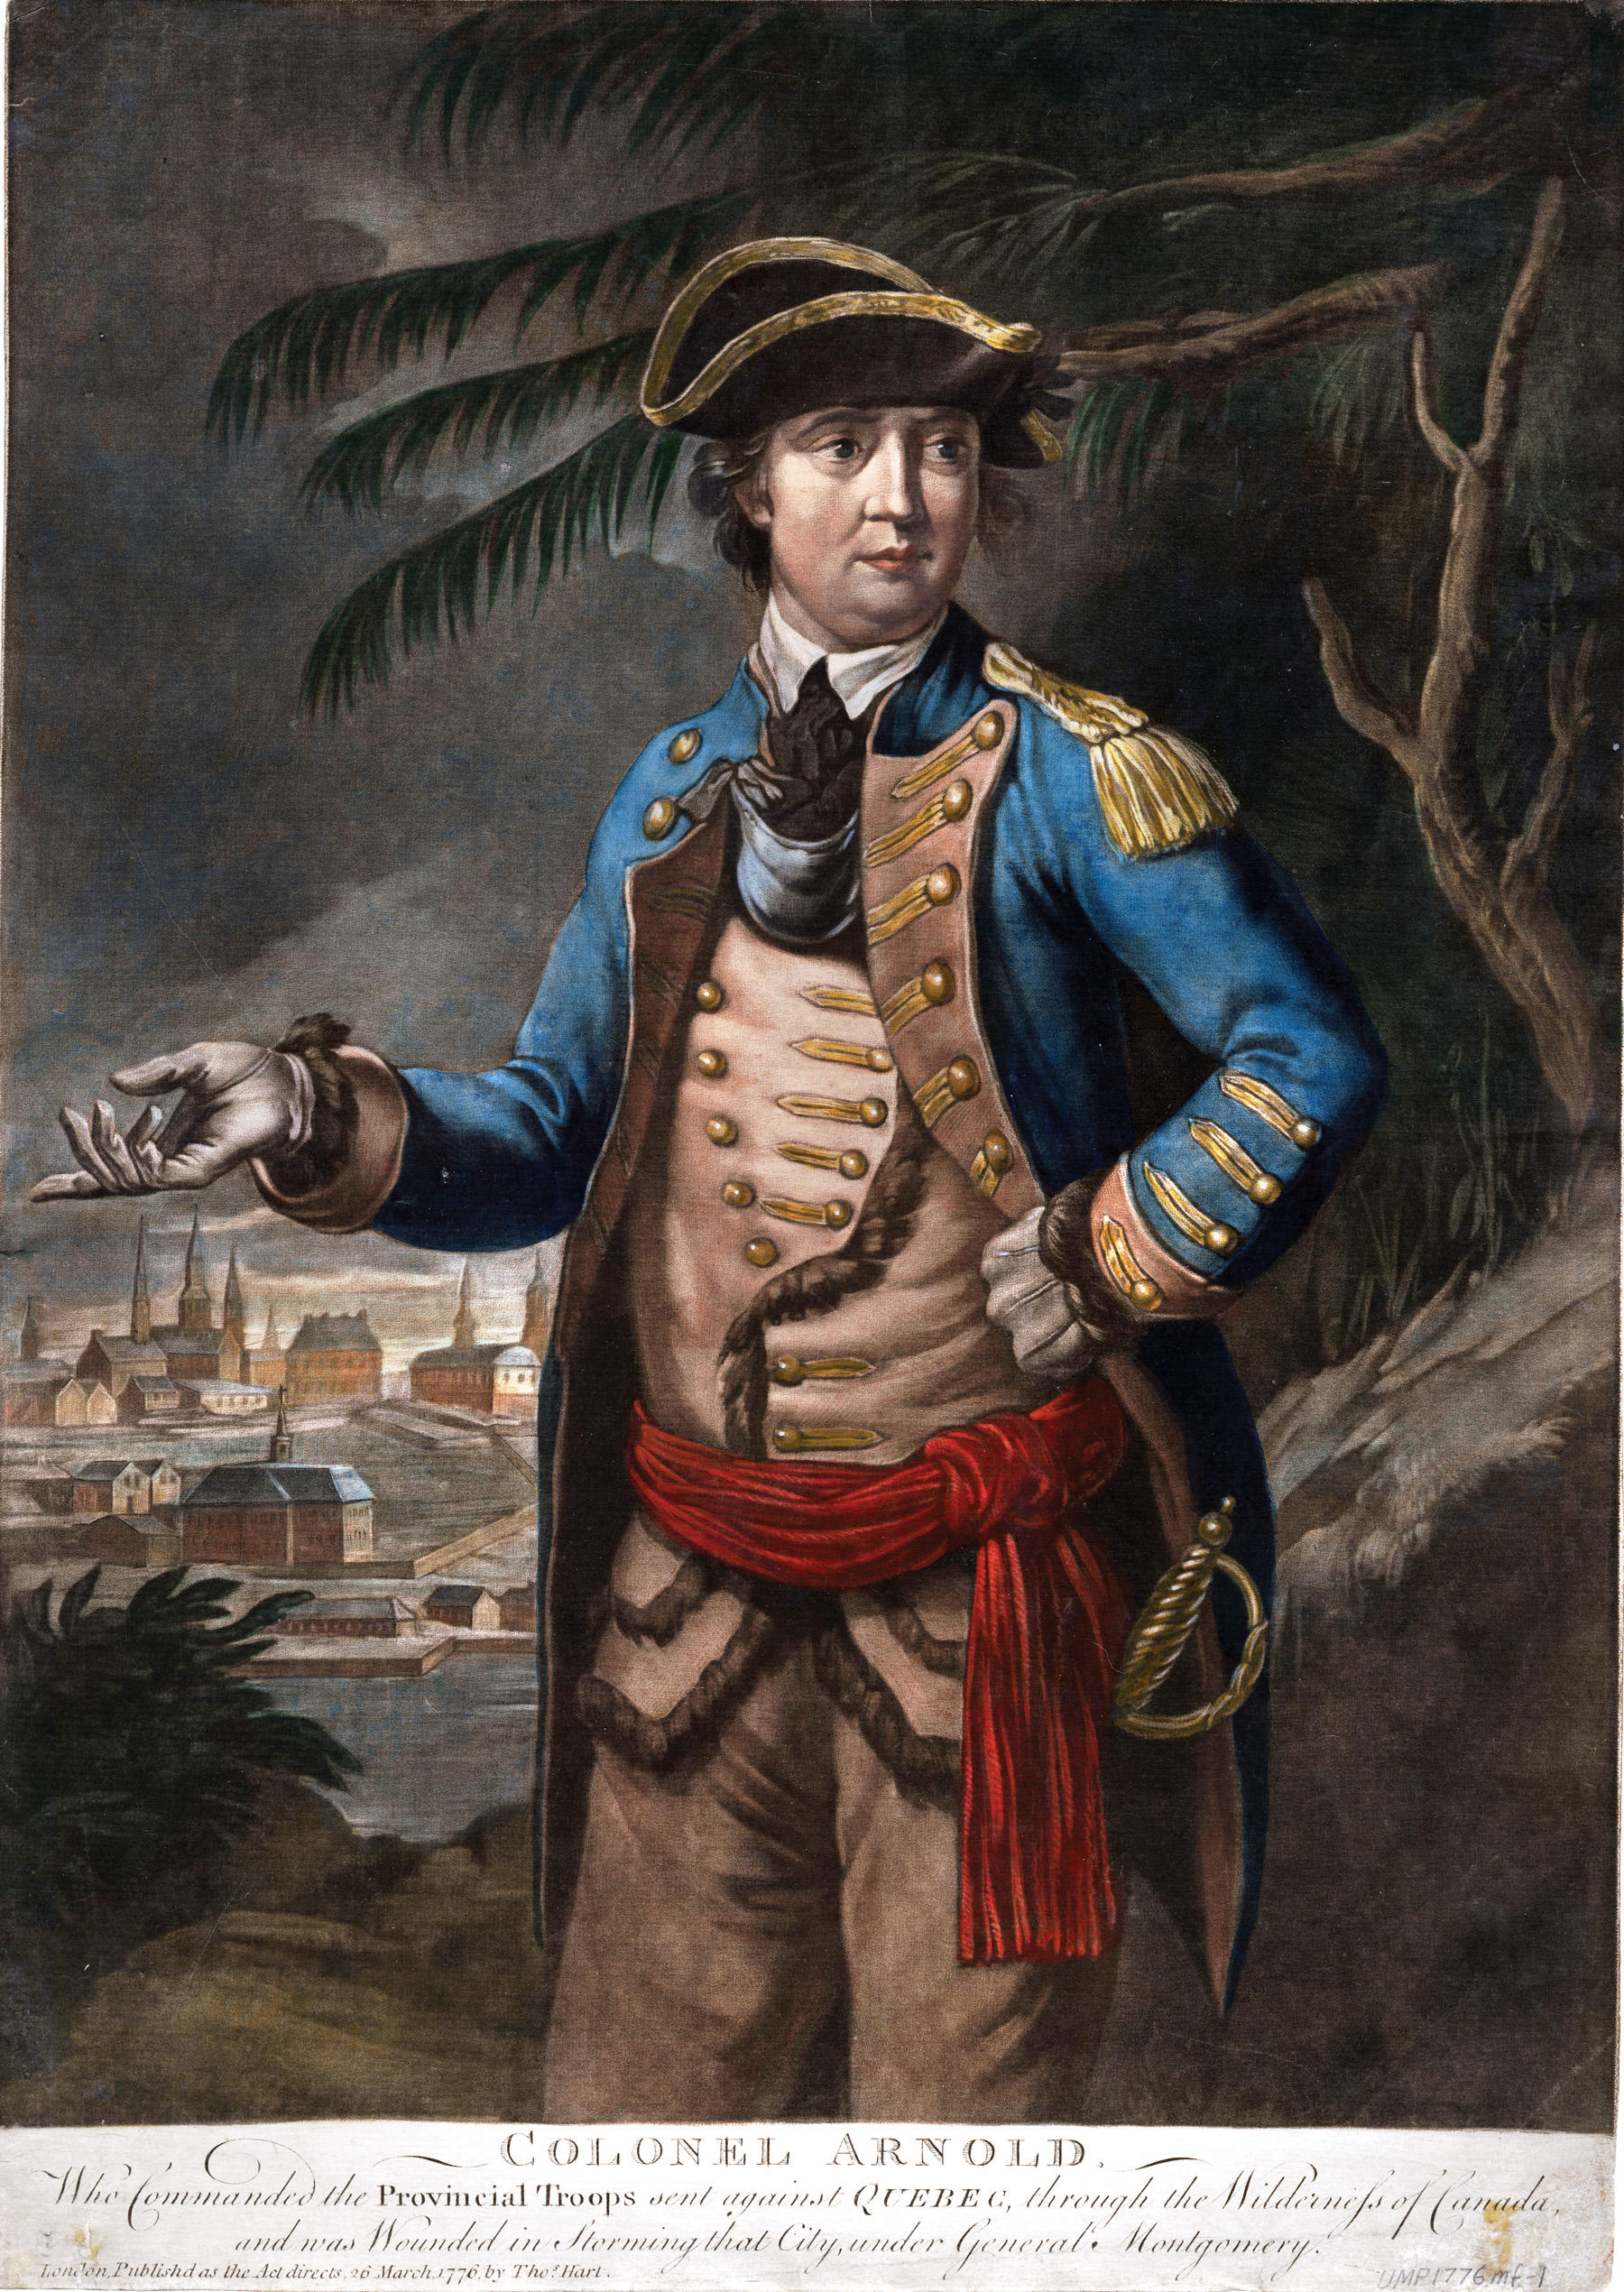 Colonel Benedict Arnold, depicted in a picture published in 1776, underestimated the difficulties his men would encounter, as well as the length of the wilderness trek.